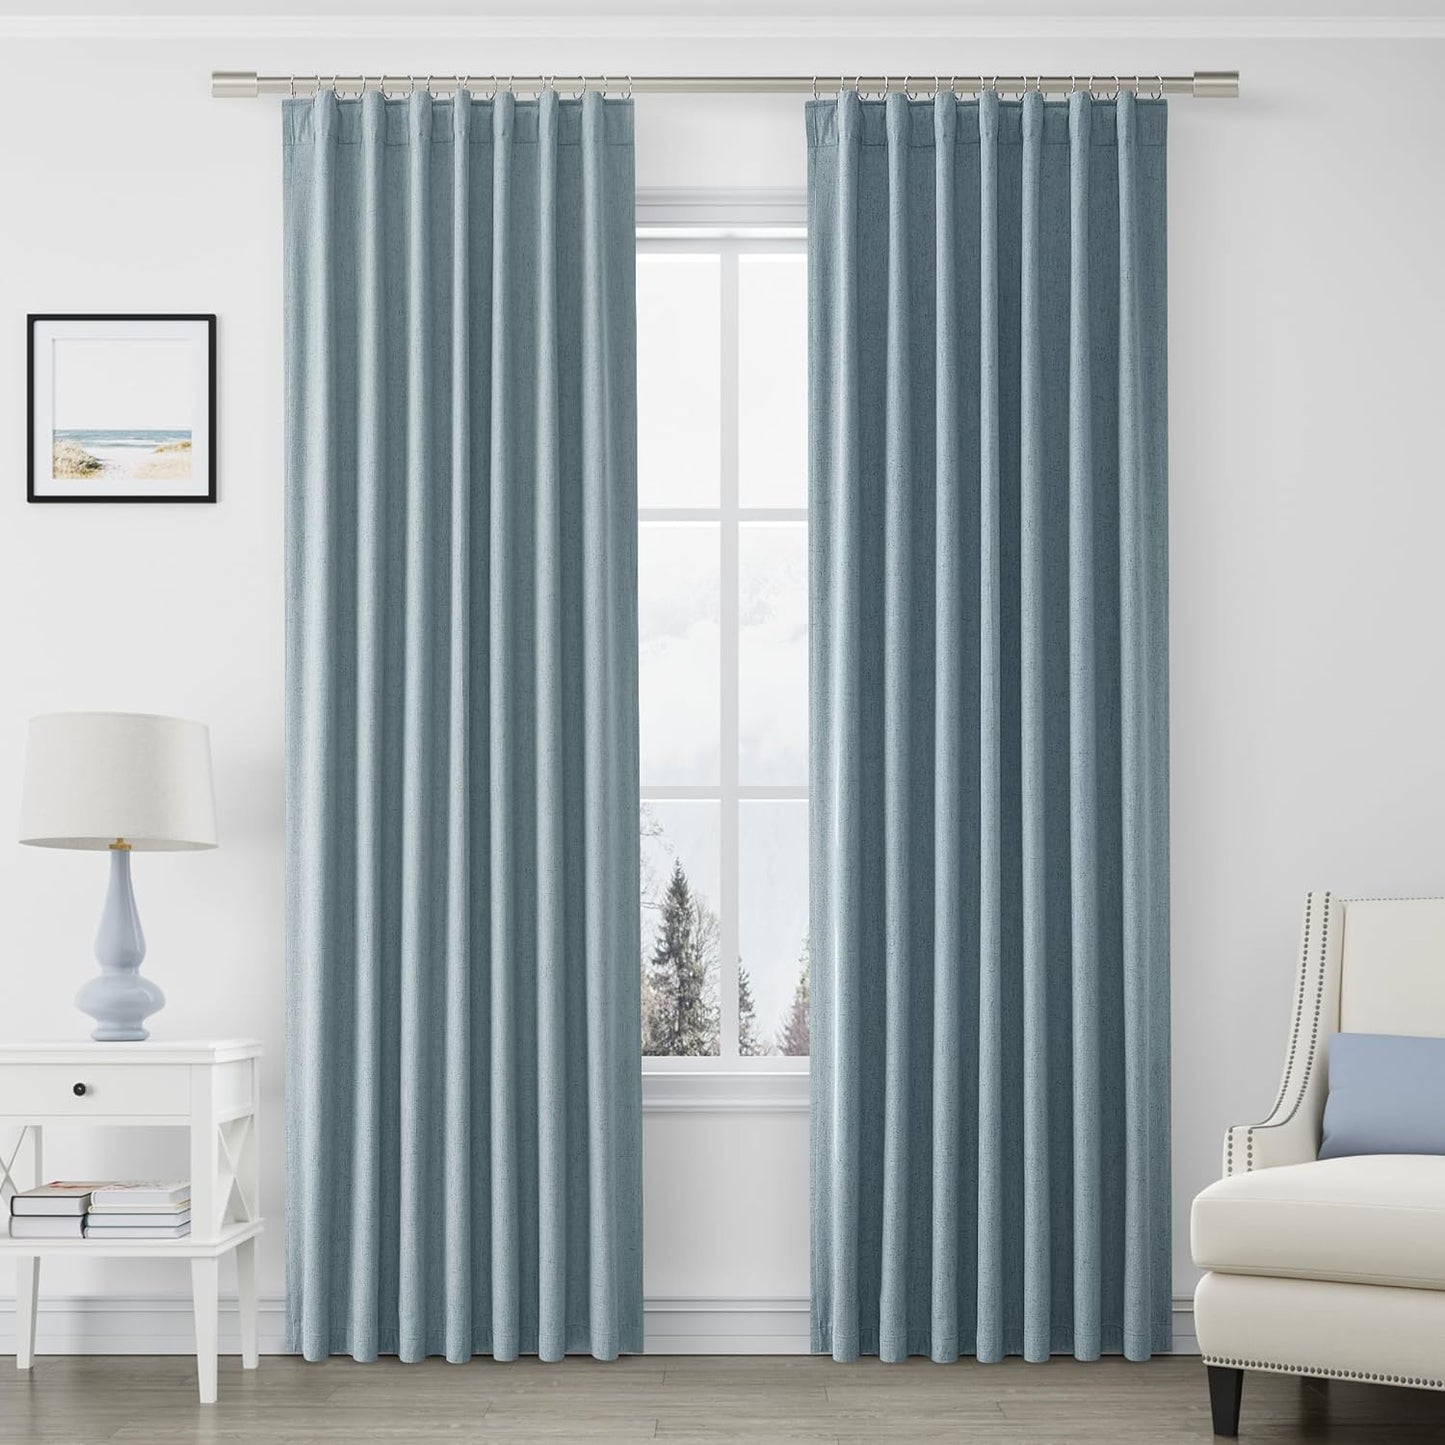 Joywell 100% Blackout Linen Curtains 102 Inches Long, Rod Pocket/Back Tab/Hook Belt/Clip Rings, Thermal Insulated Floor Length Drapes for Bedroom Dining Living Room(2 Panels,W52 X L102,Linen)  Joywell Blue 52W X 96L Inch X 2 Panels 